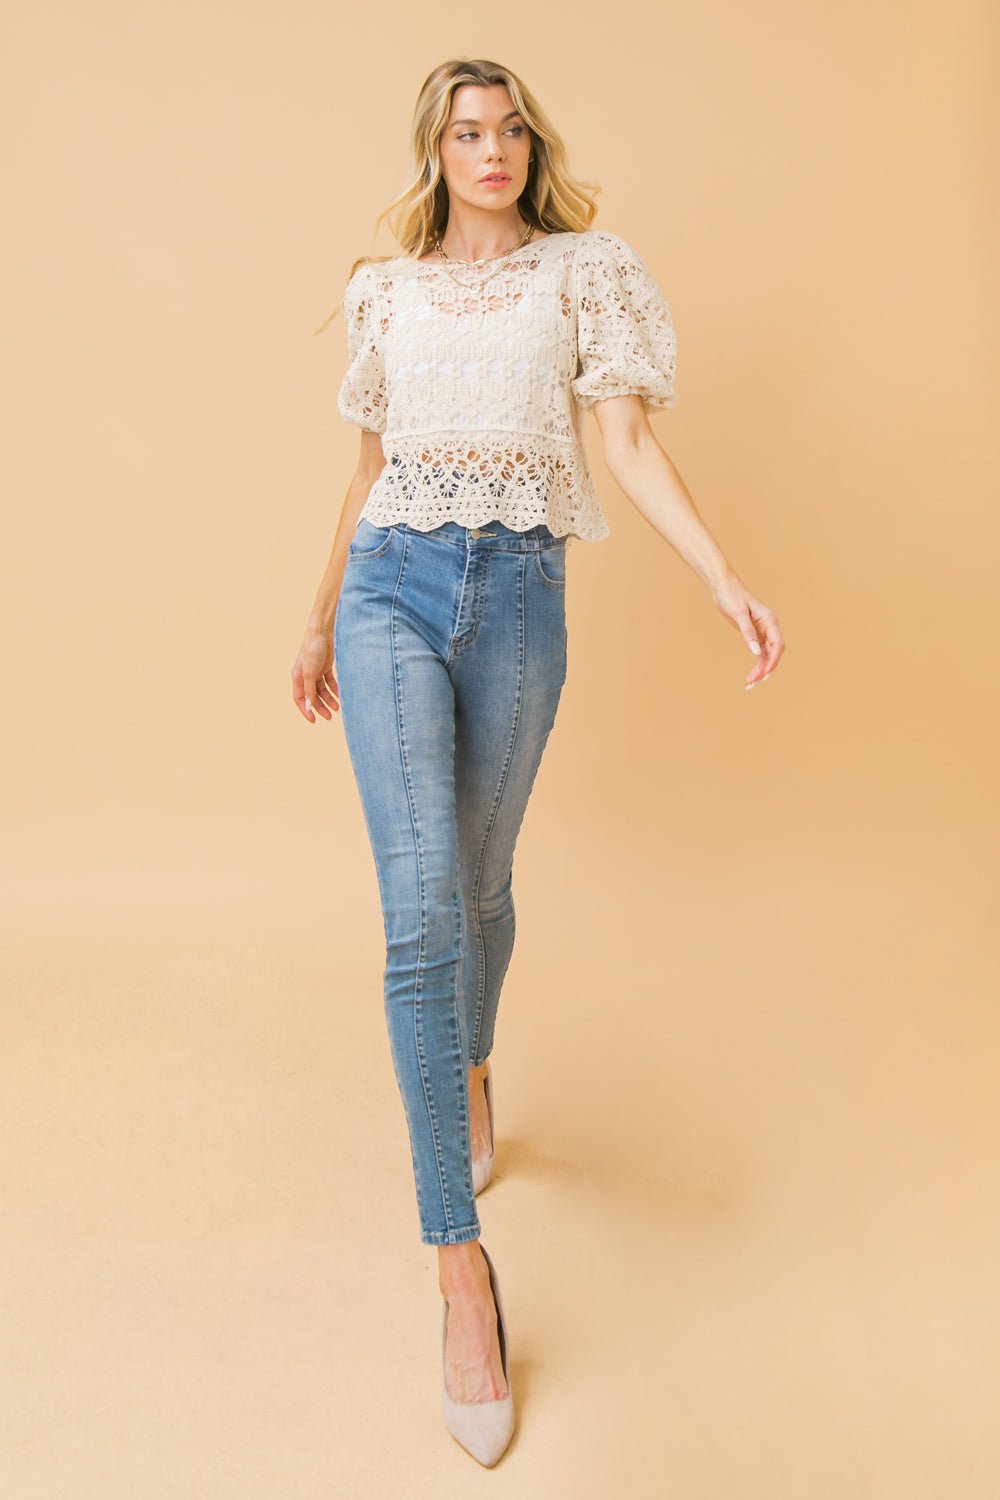 SINCERELY YOURS LACE CROP TOP - Mack & Harvie